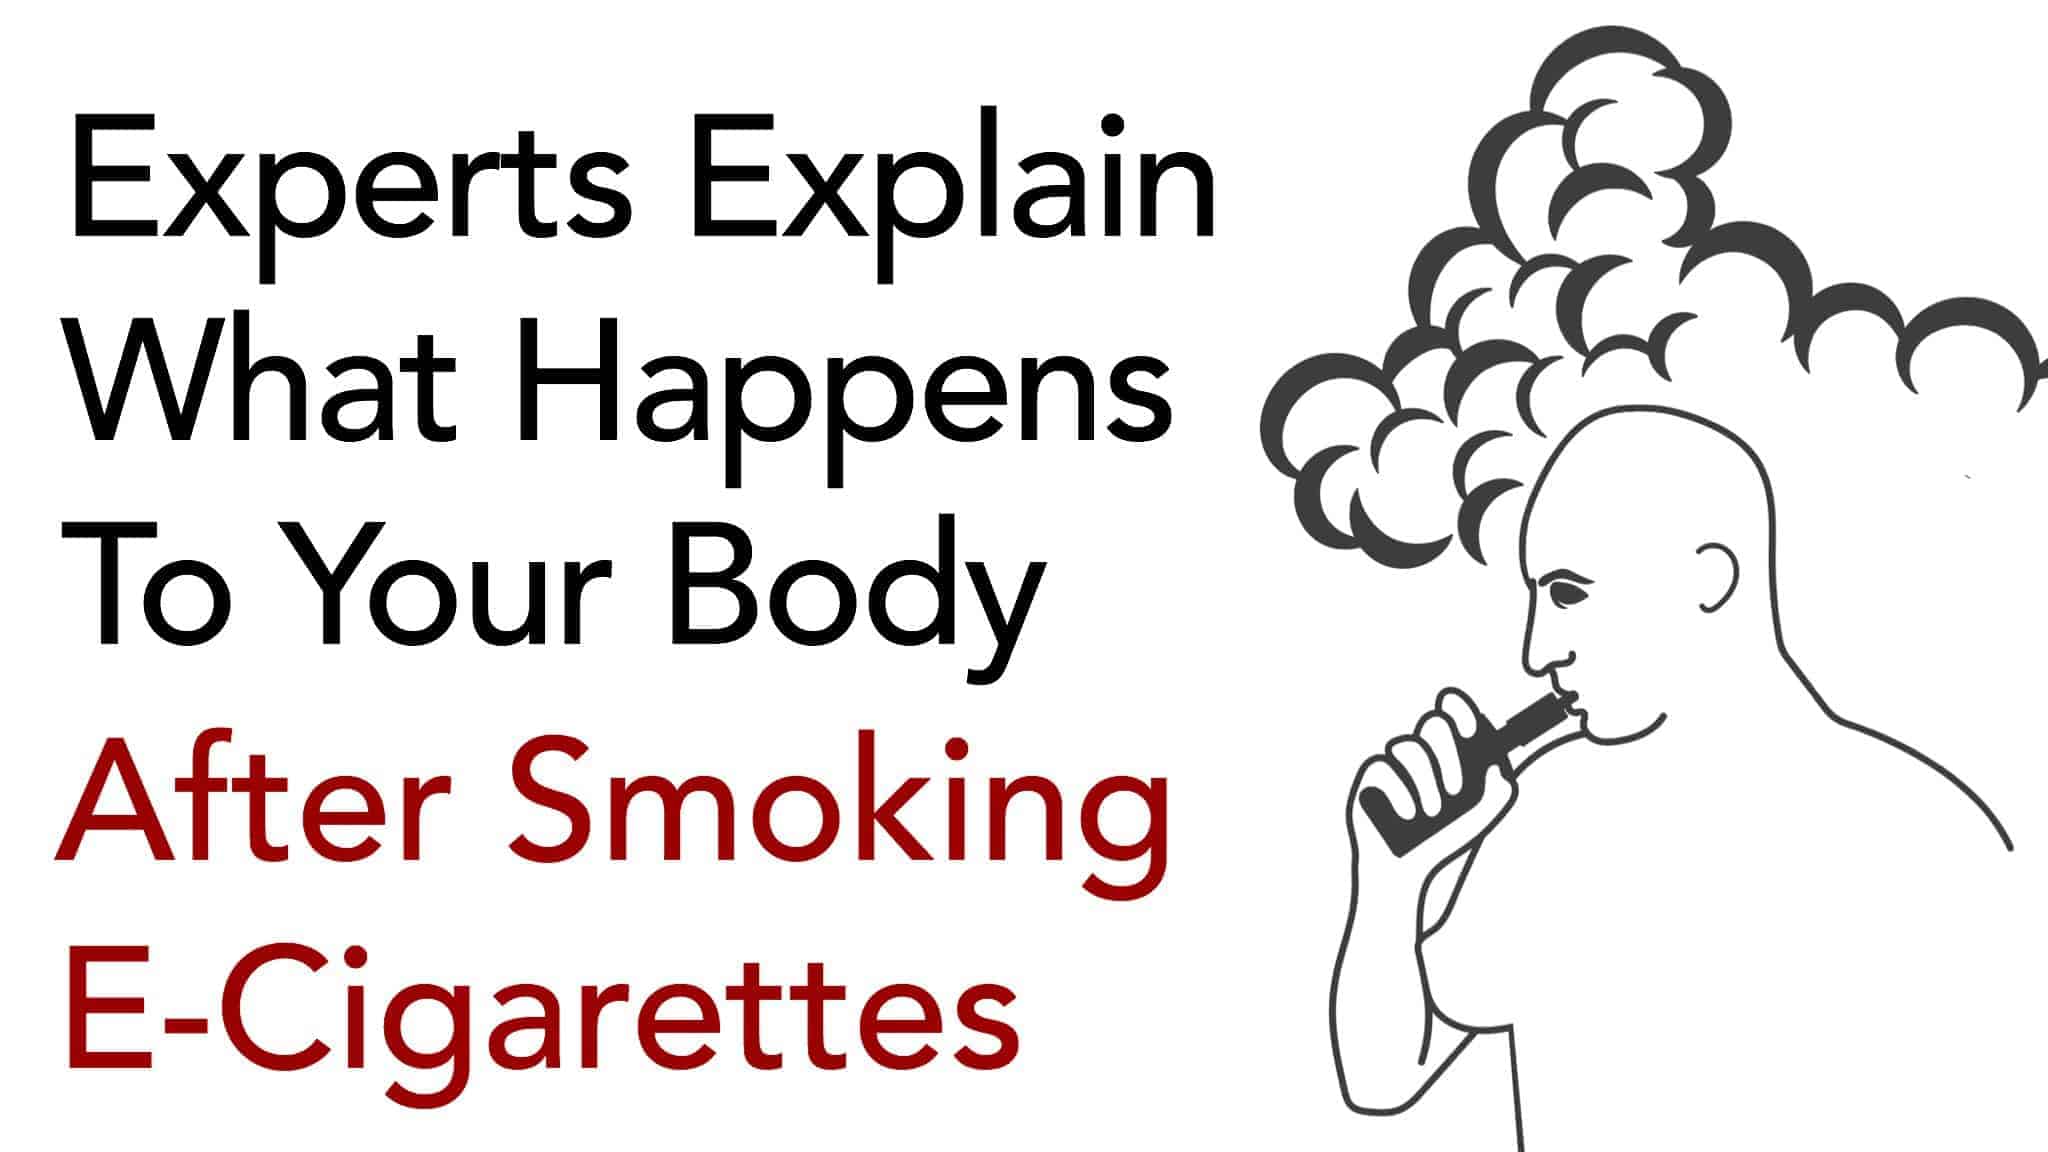 Experts Explain What Happens to Your Body After Smoking E-Cigarettes